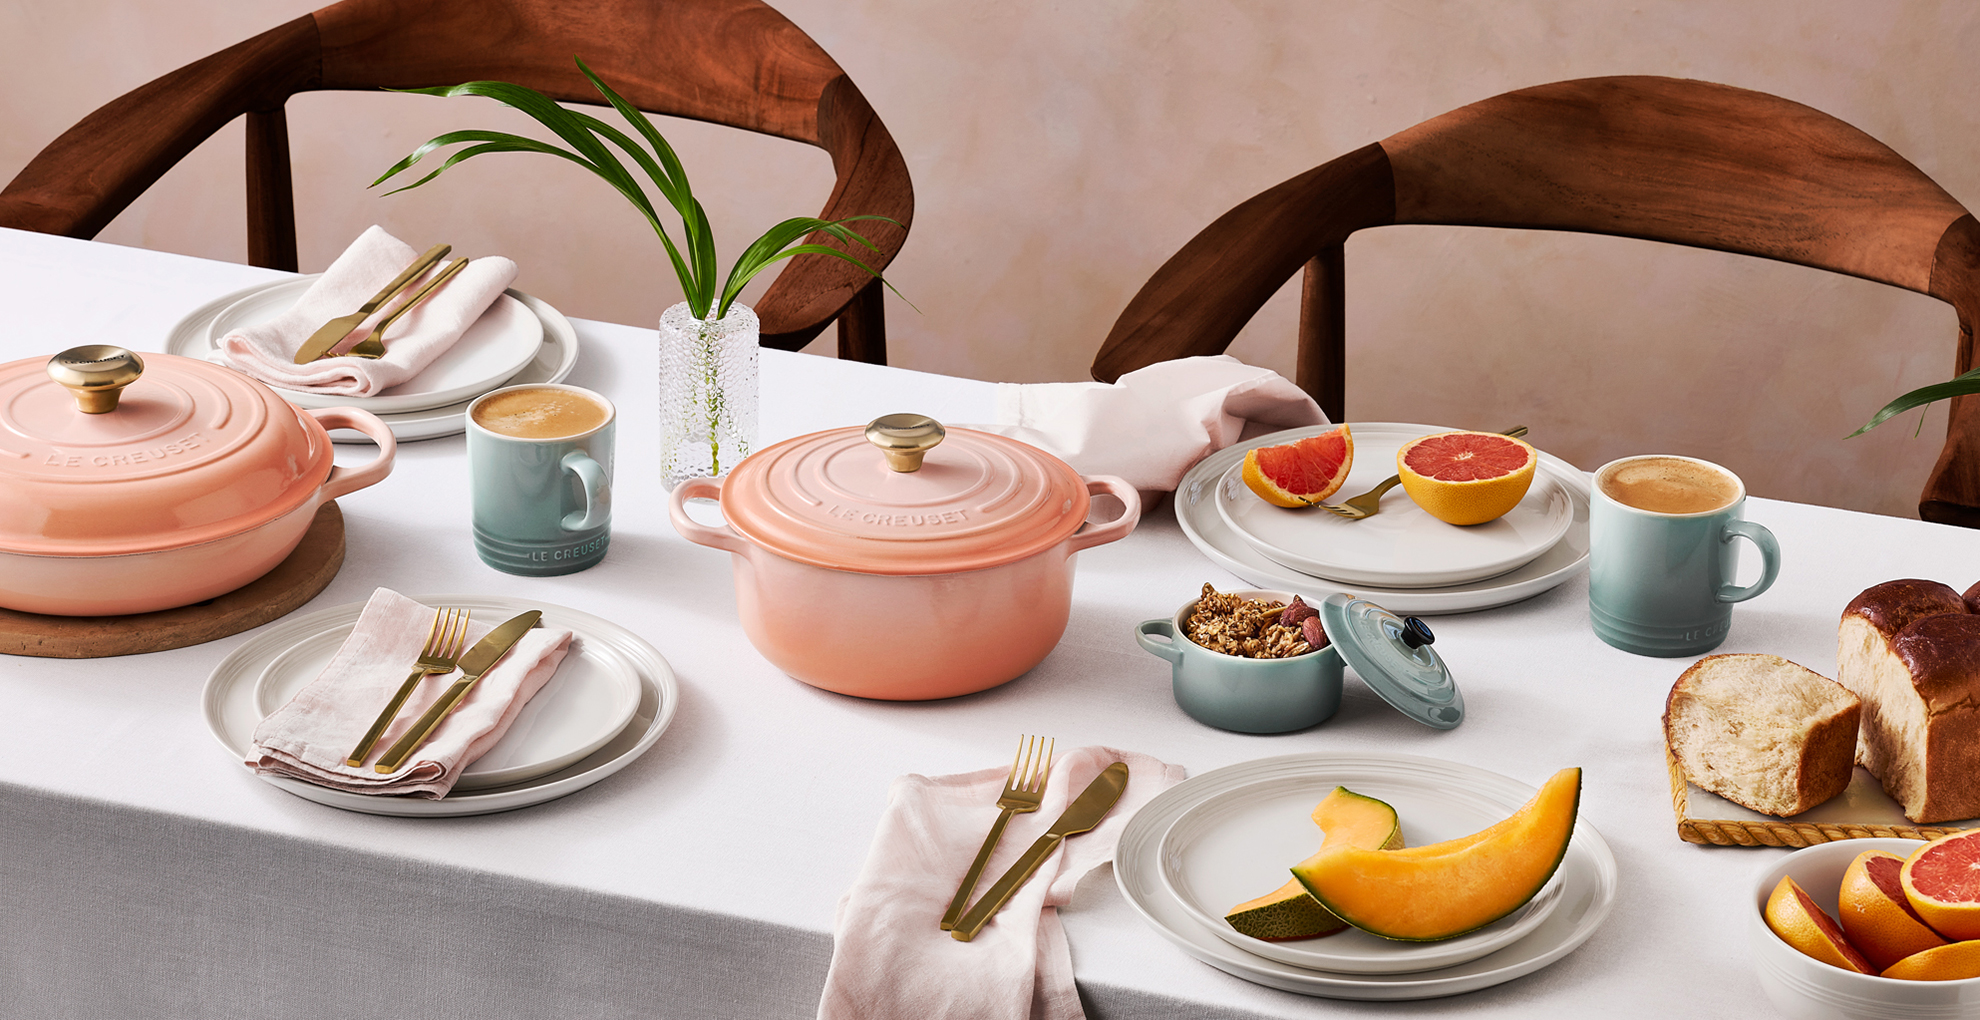 Le Creuset limited edition Peche colour on a dining table